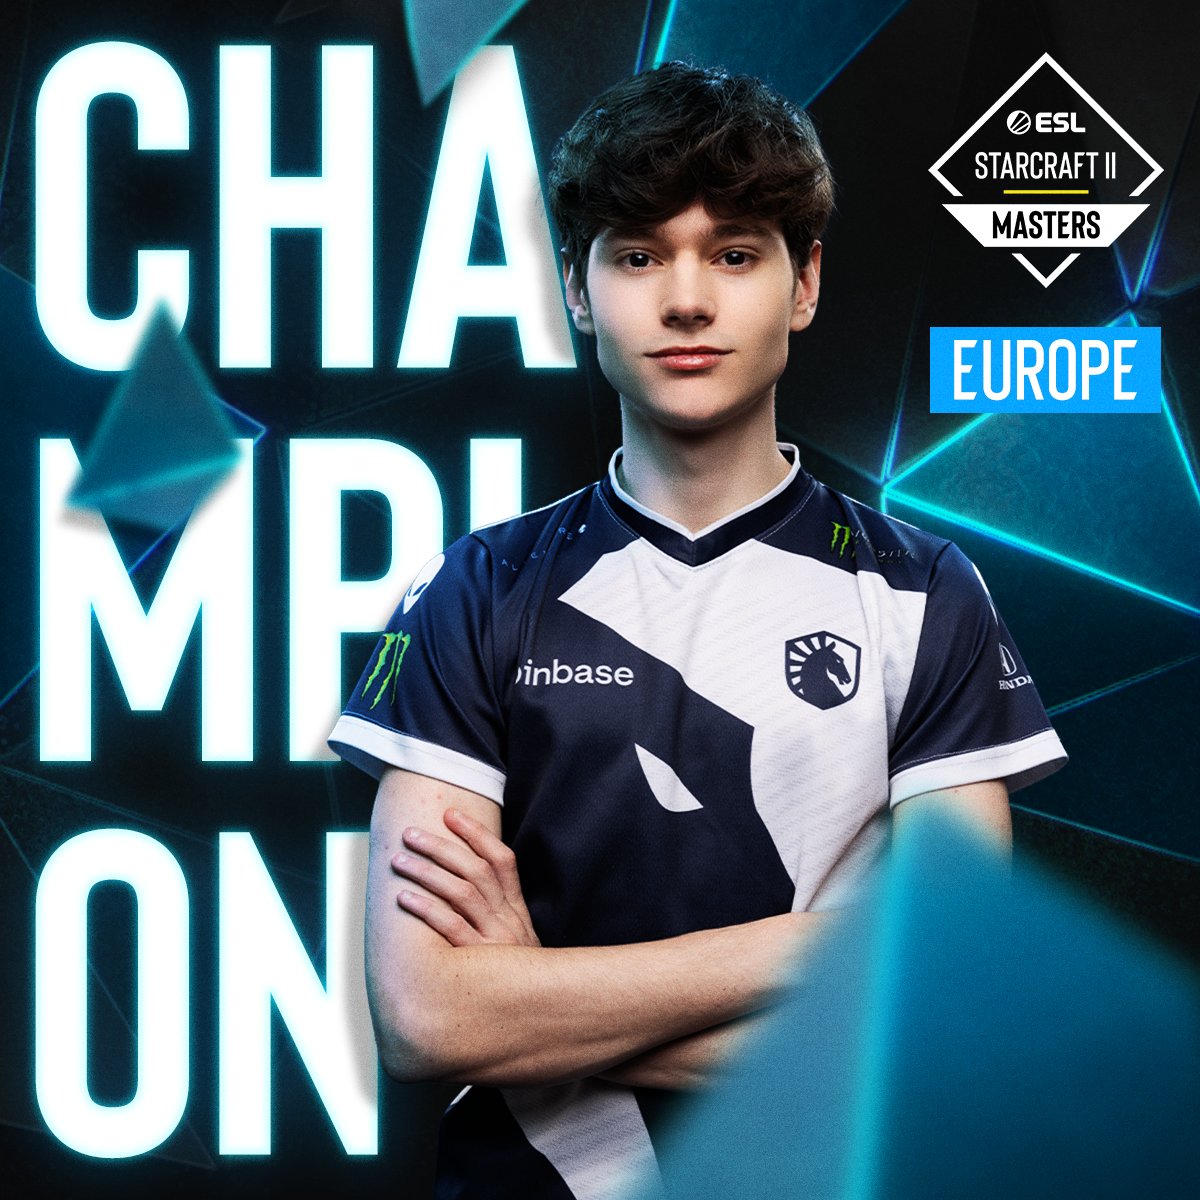 🏆🏆 AND THERE YOU HAVE YOUR EUROPE REGIONAL CHAMPION 🏆🏆 Going into the finals from the lower bracket with a one map deficit, @Clem_sc2 reigns supreme in the region with a 4-3 victory over MaxPax! 👏👏